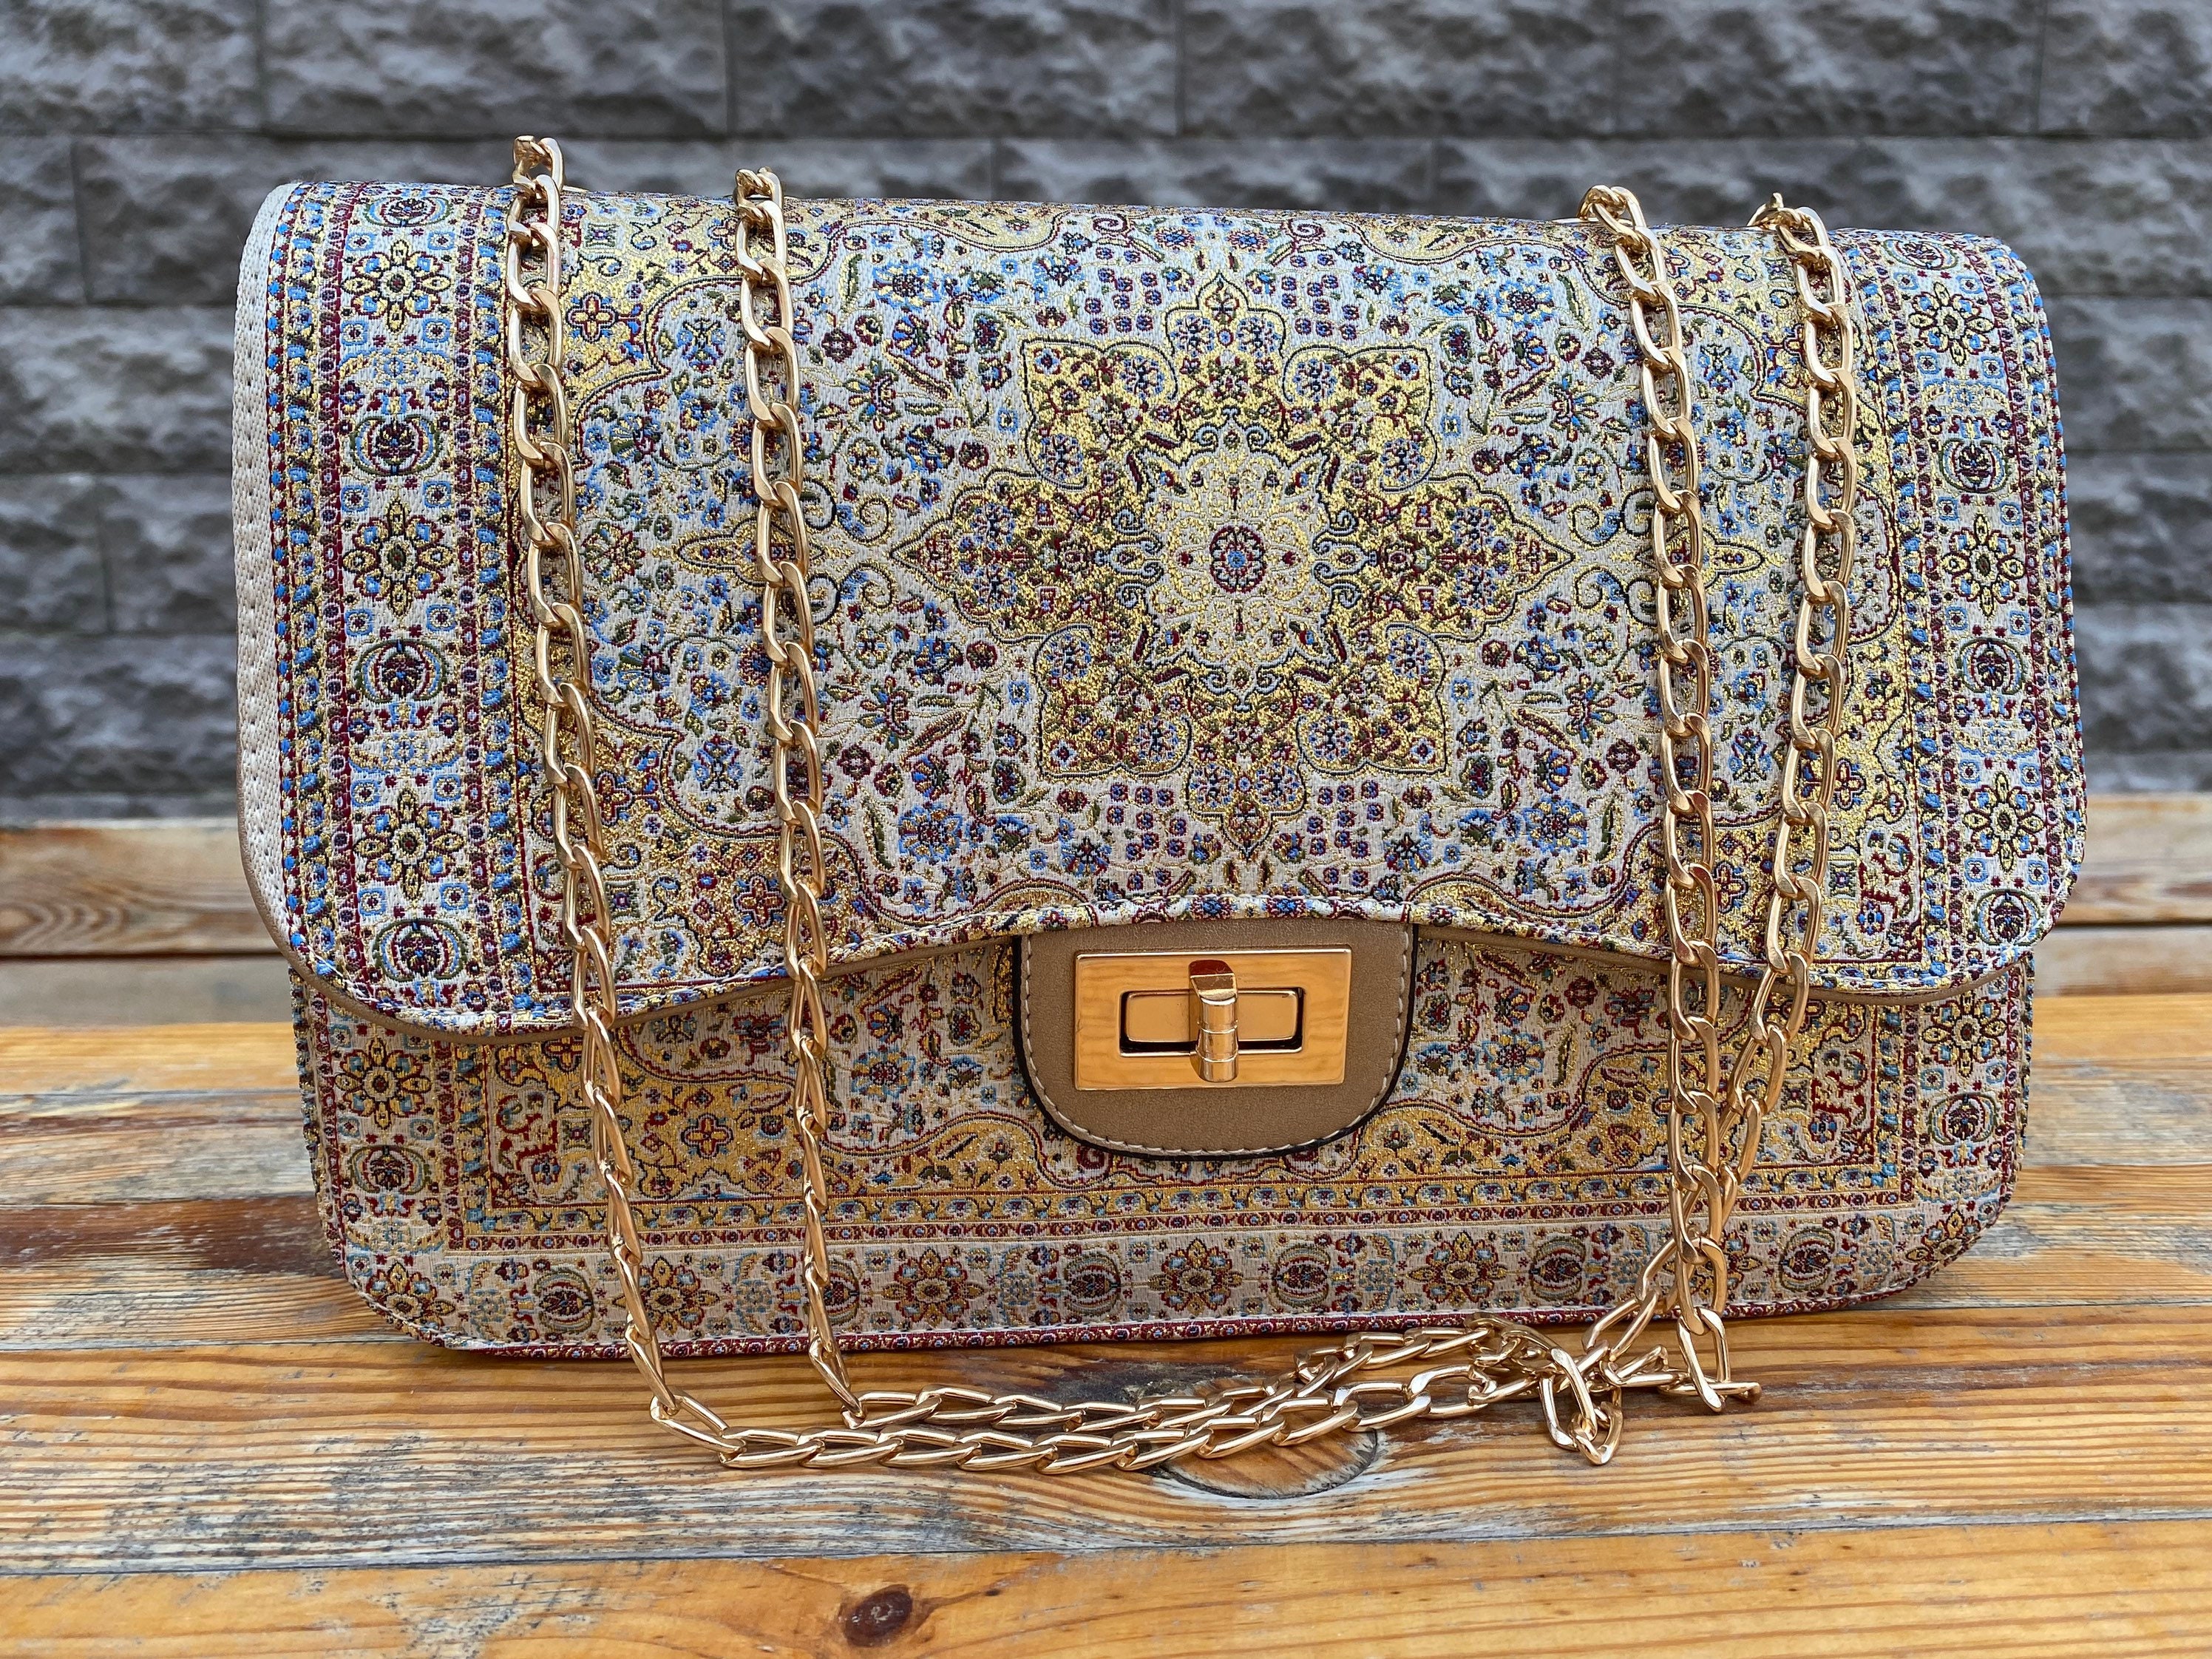 The Hand-Beaded Chanel Bag That Takes 120 Hours to Embroider - The